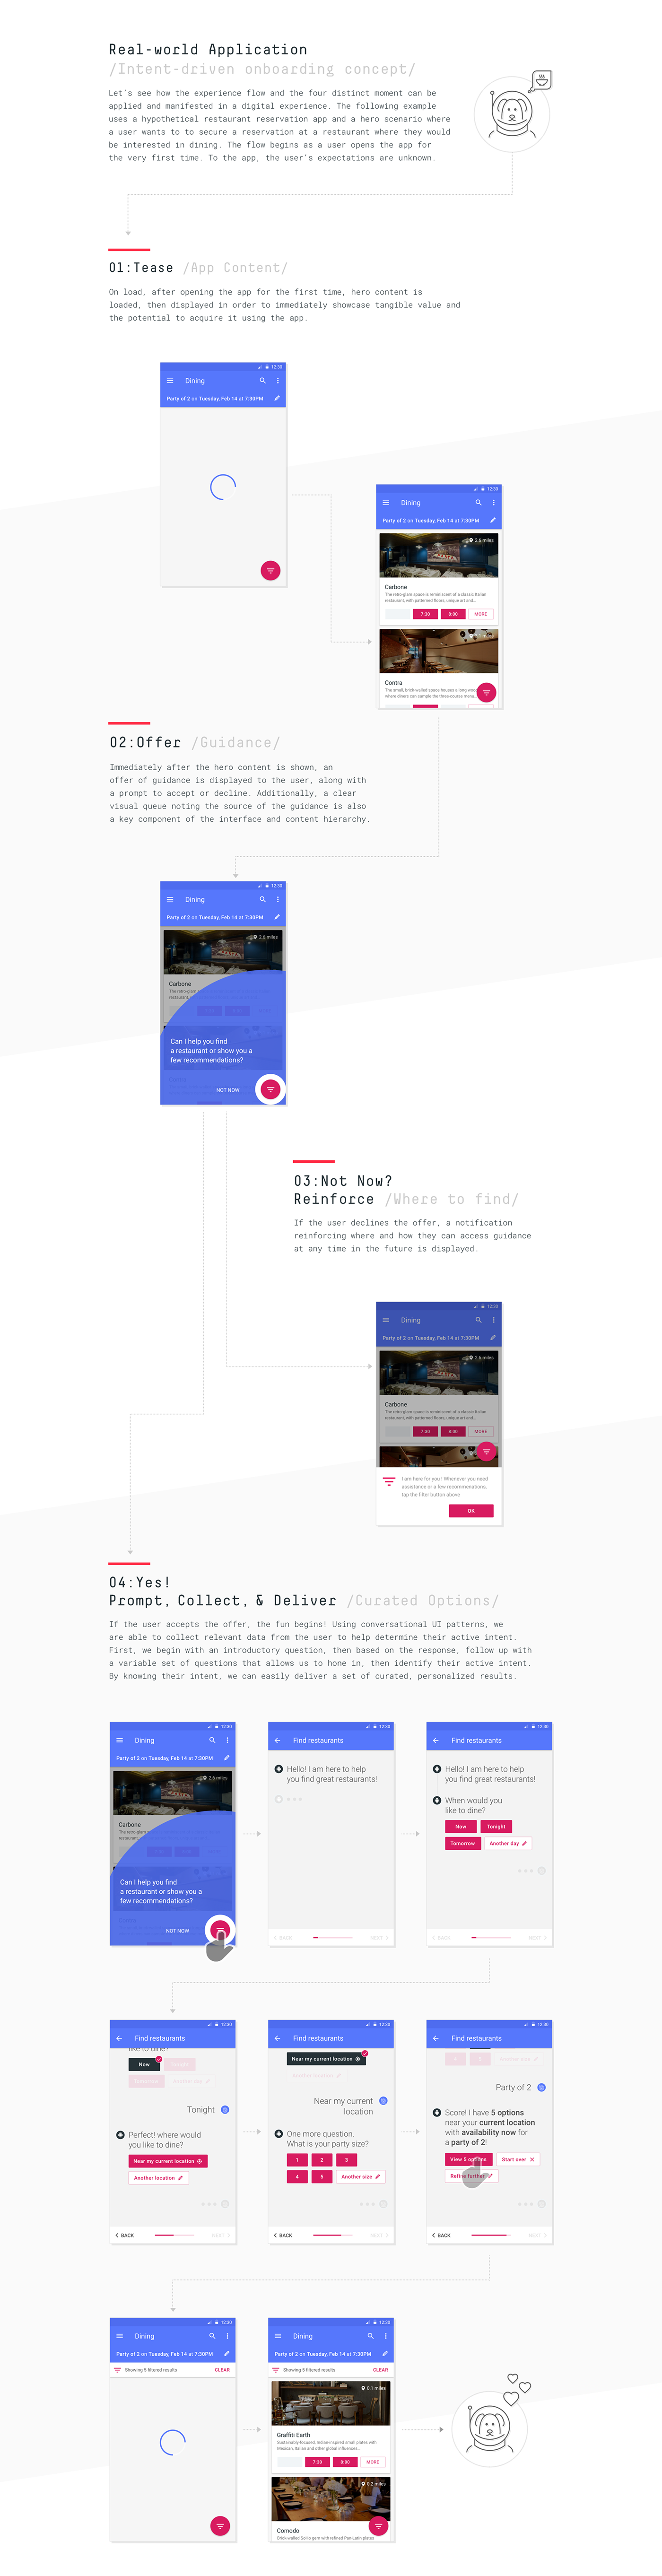 Onboarding app material design Converational UI Chat ios android interaction mobile